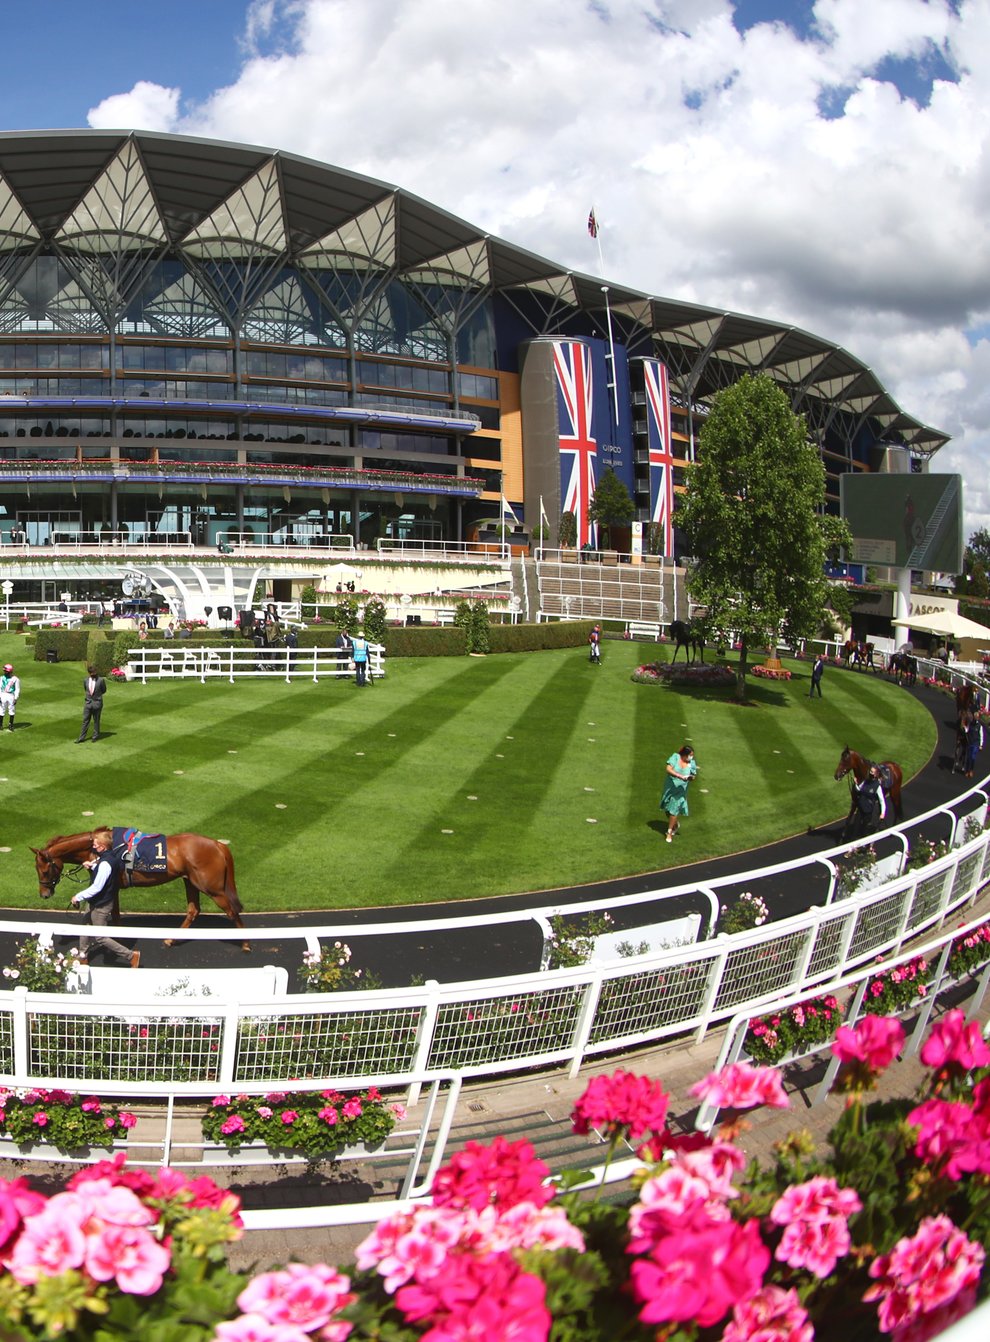 Ascot has announced changes to the Royal meeting